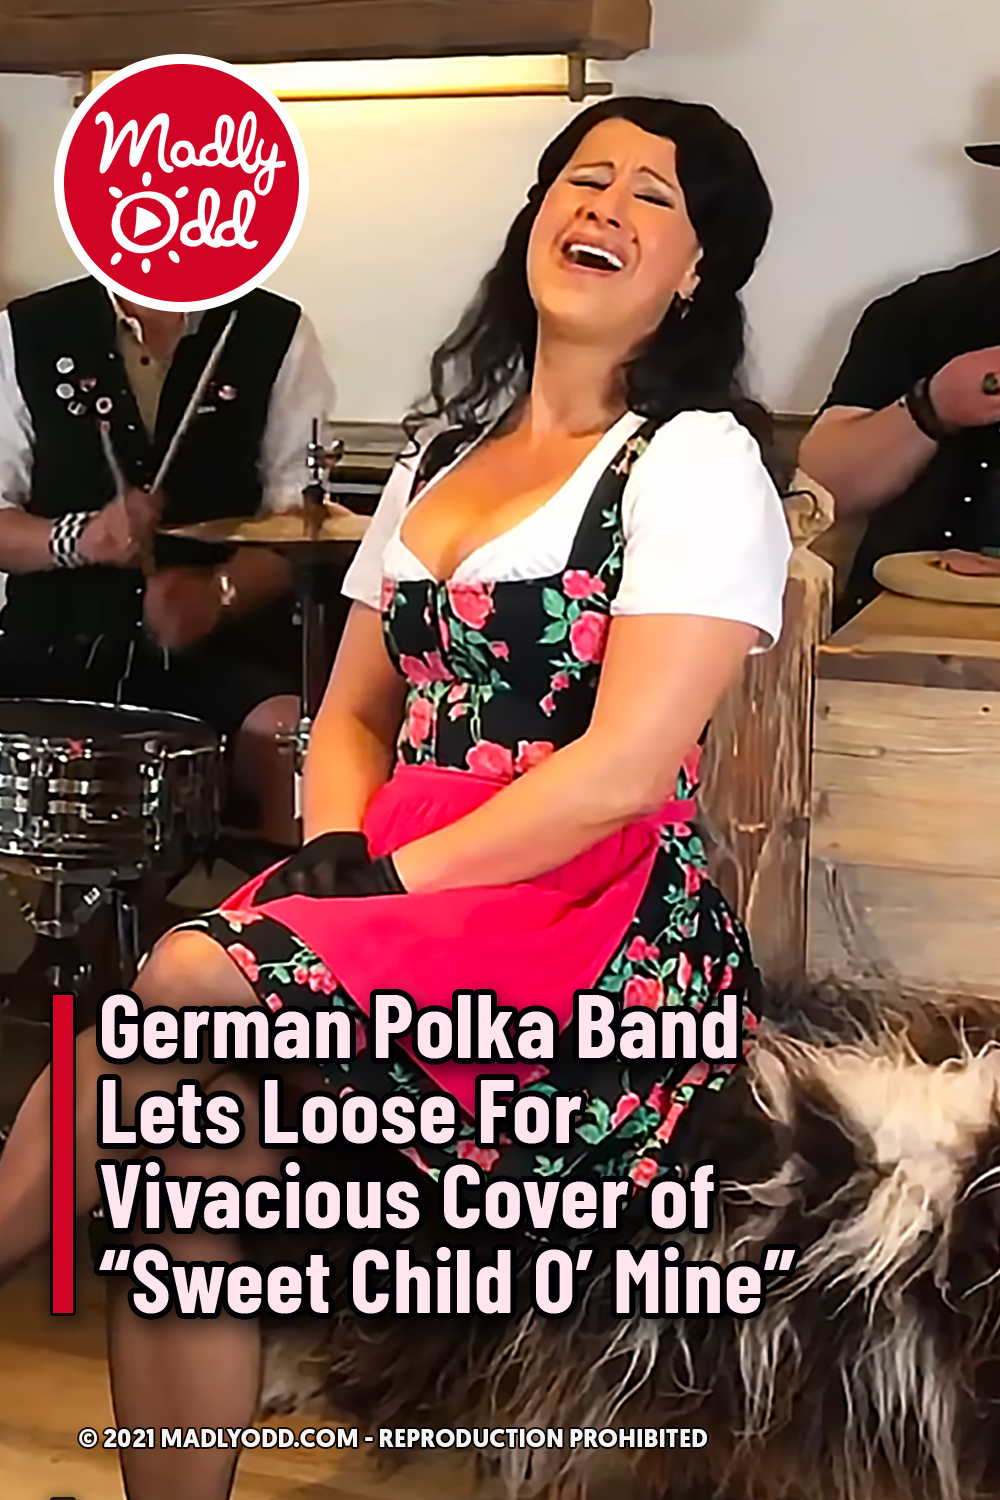 German Polka Band Lets Loose For Vivacious Cover of “Sweet Child O’ Mine”